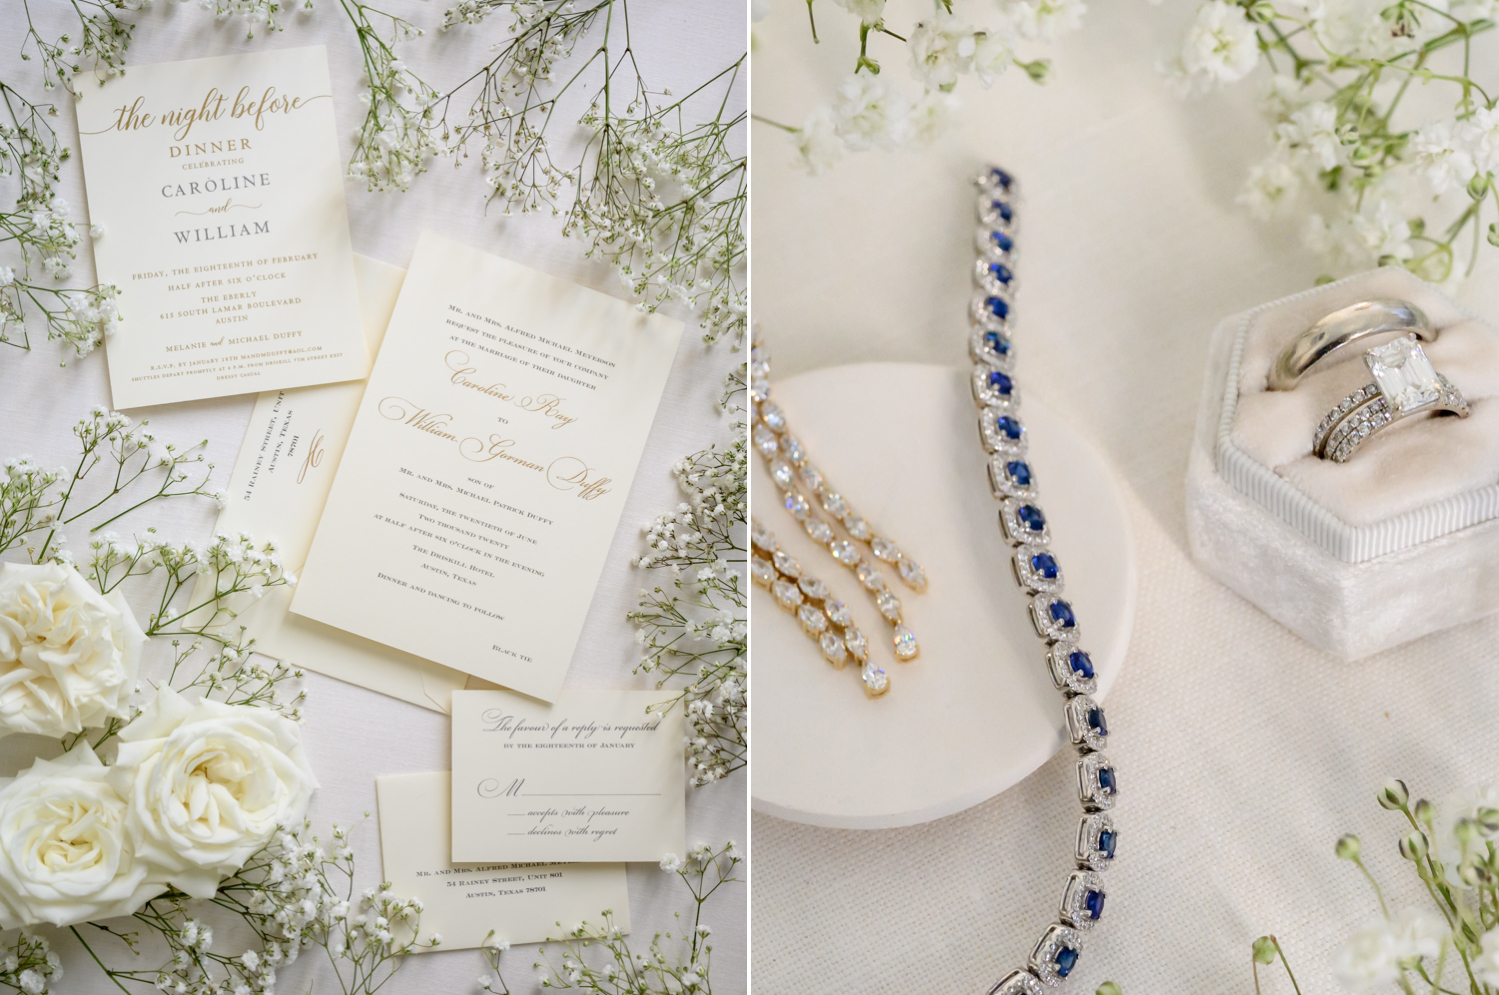 Left: A classic and simple wedding invitation suite, bordered with white roses and baby's breath. Right: The bride's wedding day jewelry, featuring a blue sapphire tennis bracelet.